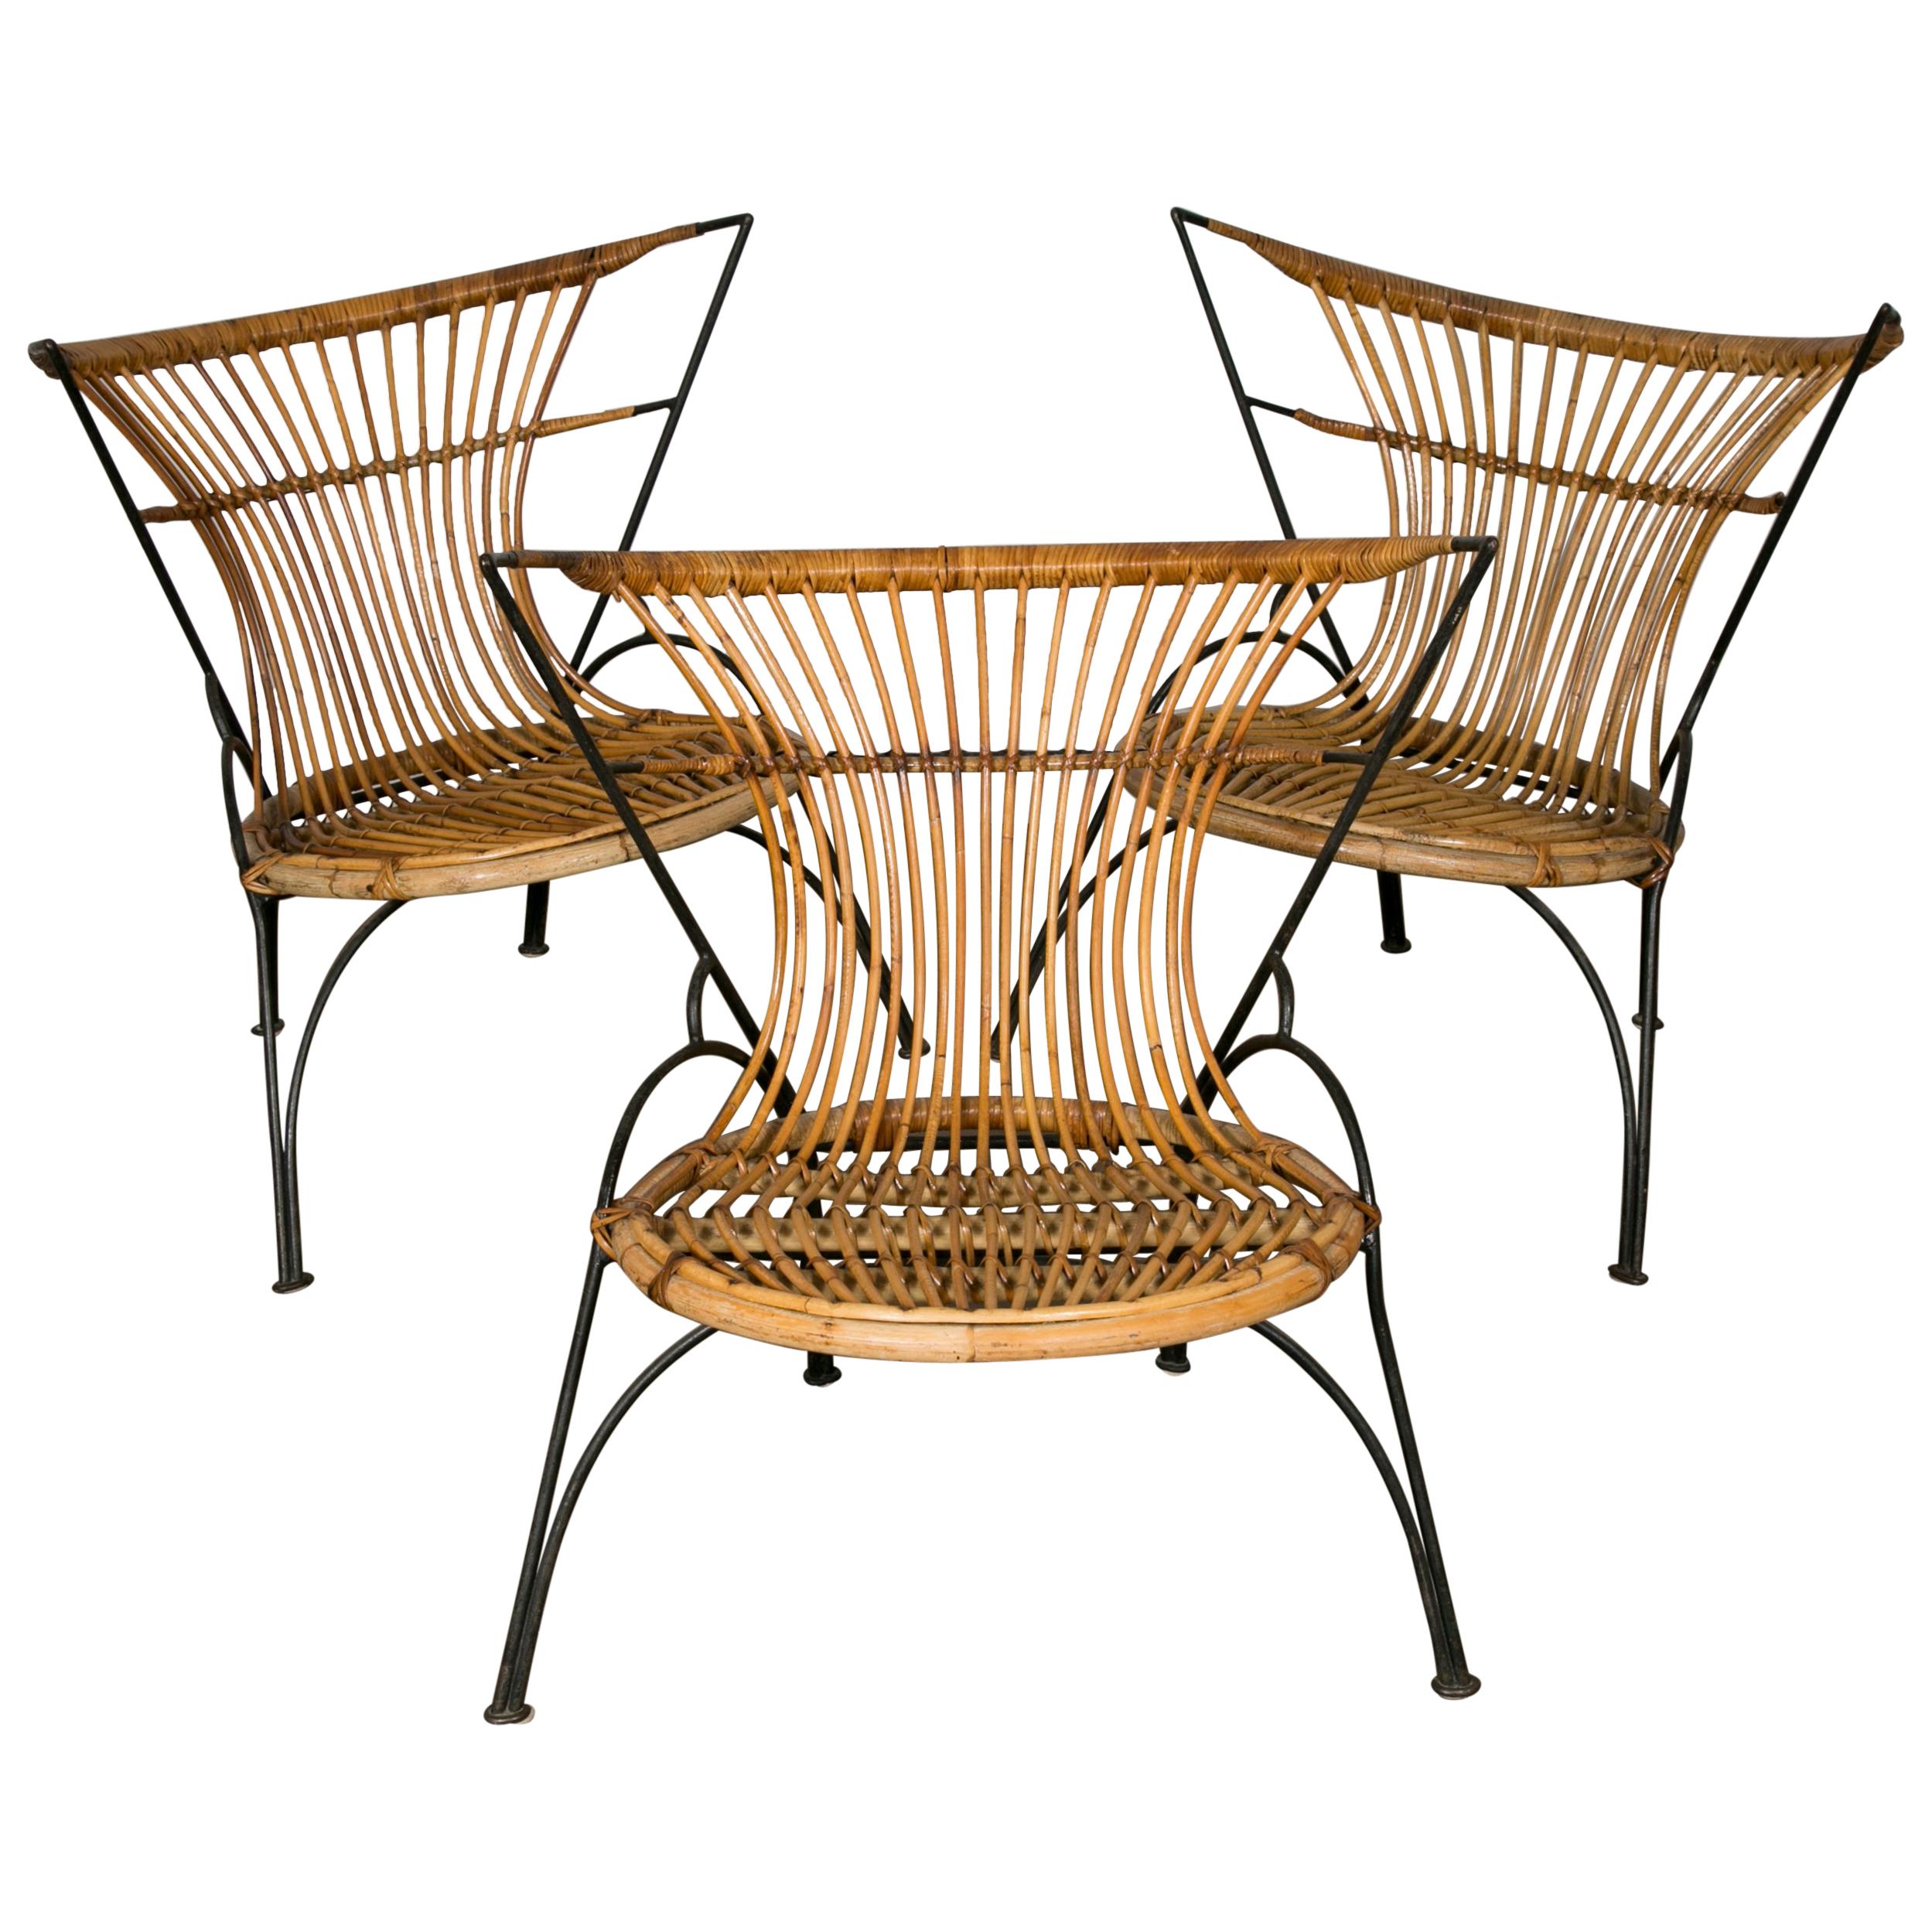 Set of Three Metal and Wicker Slipper Chairs